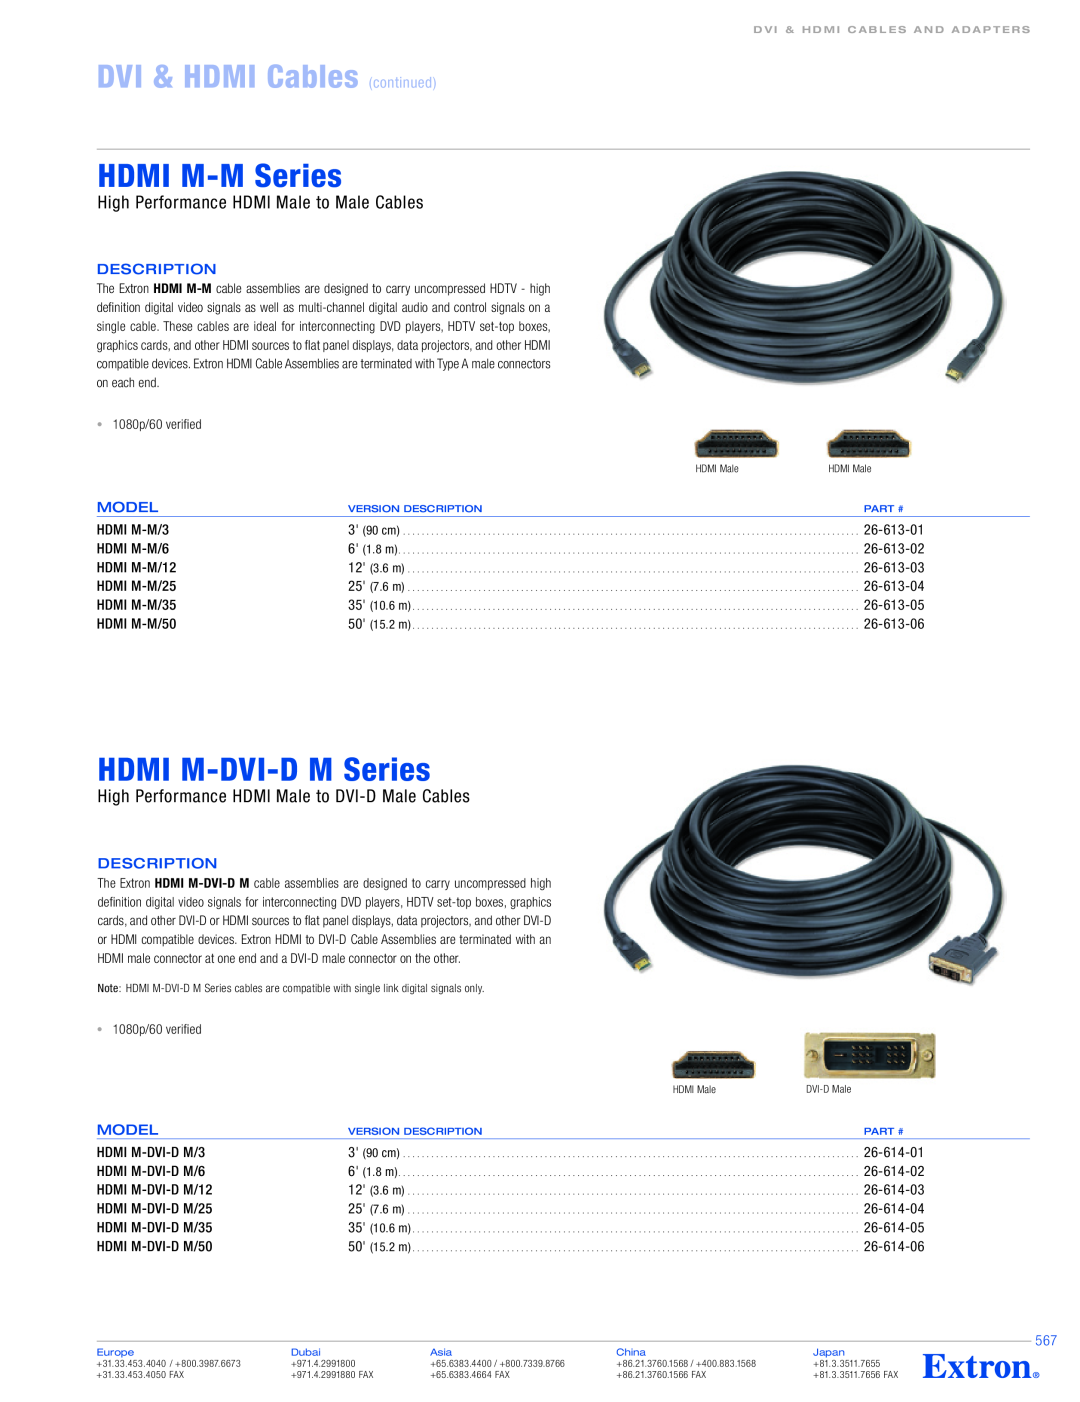 Extron electronic HDMI M-M/3 specifications DVI & HDMI Cables continued, HDMI M-M Series, HDMI M-DVI-D M Series, Model 